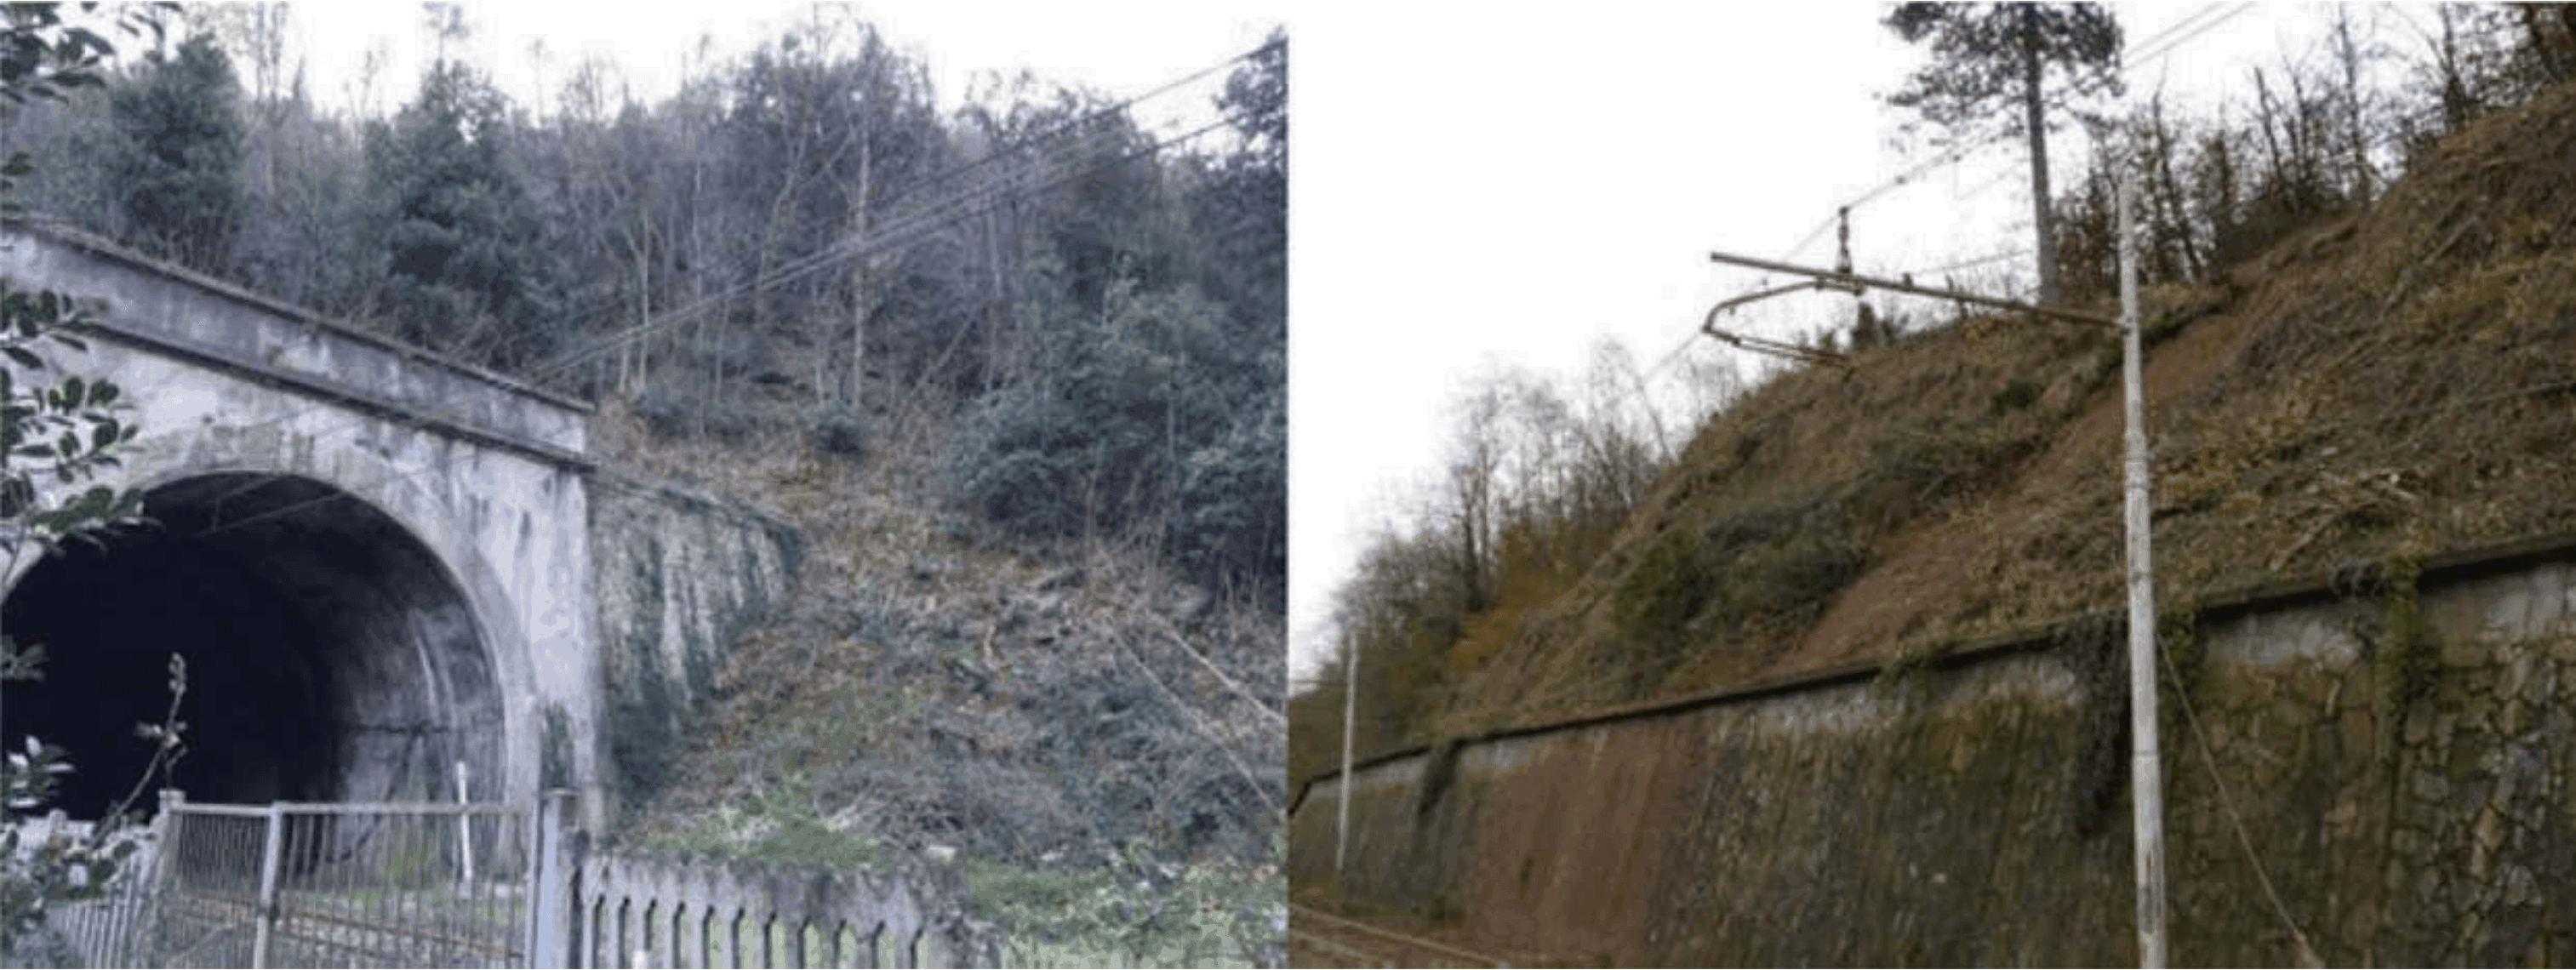 Landslide from ch. 6+592 to 6+663 (Via Altare) (left) and landslide from ch. 13+610 to 13+700 (Via Altare) (right)